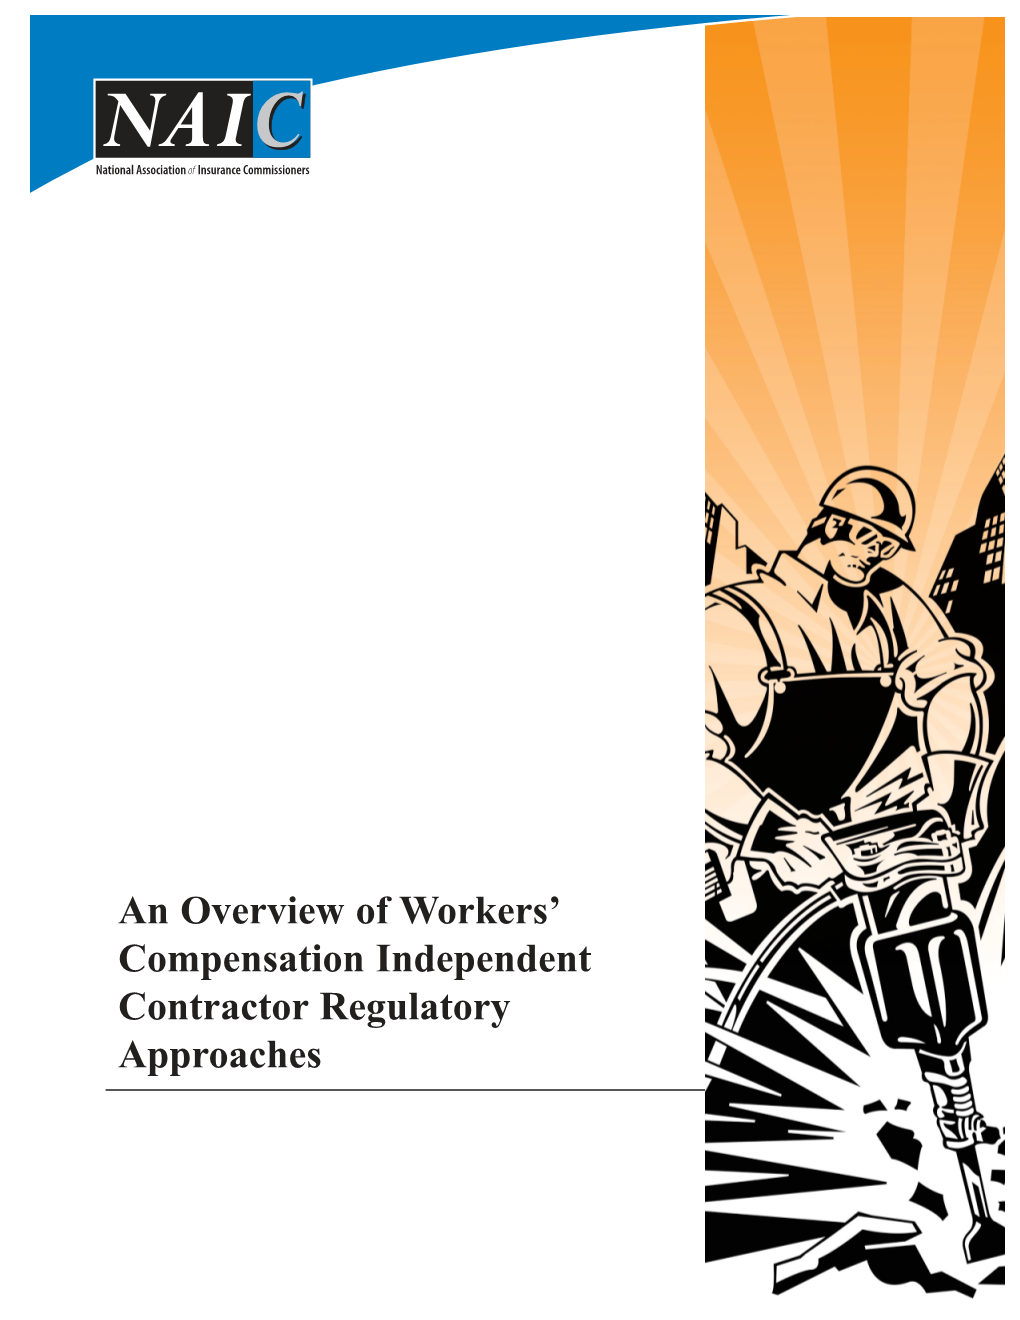 An Overview of Workers' Compensation Independent